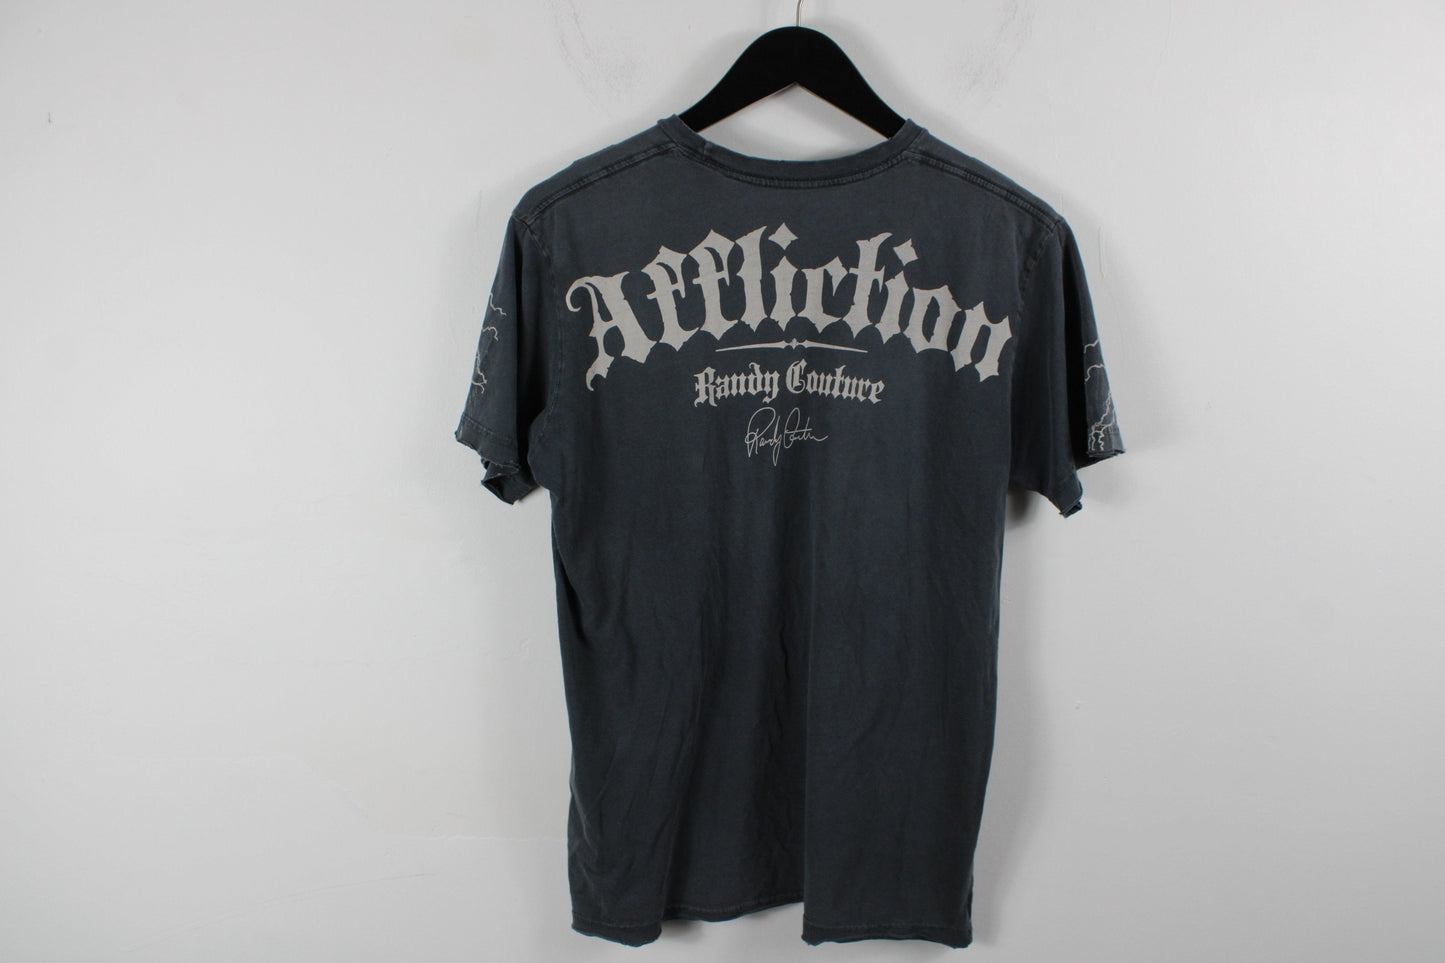 Affliction T-Shirt / Vintage Active-Wear Company / 90s-2000s Extreme Coutoure Tee Shirt / Y2K Graphic